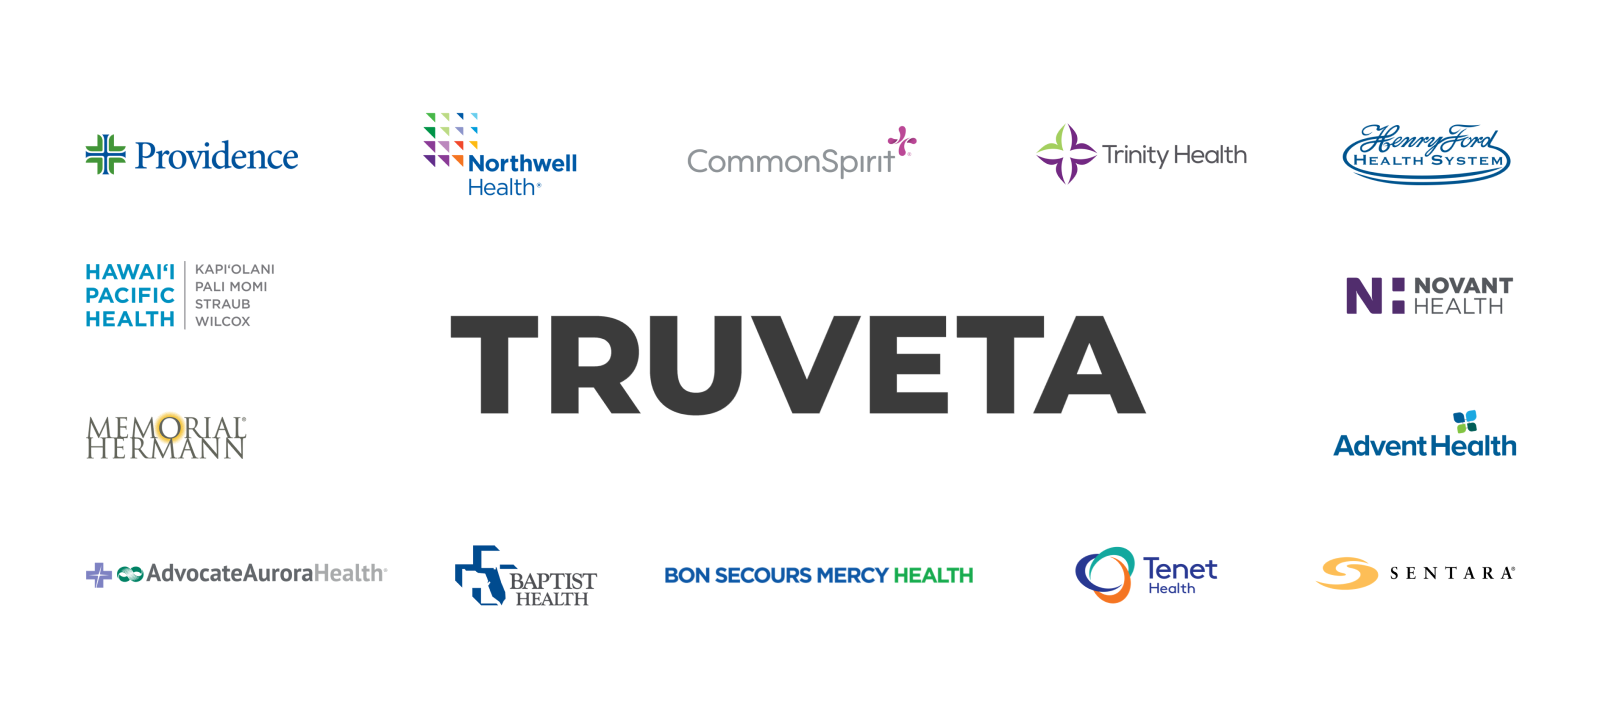 Creating Truveta to Save Lives with Data